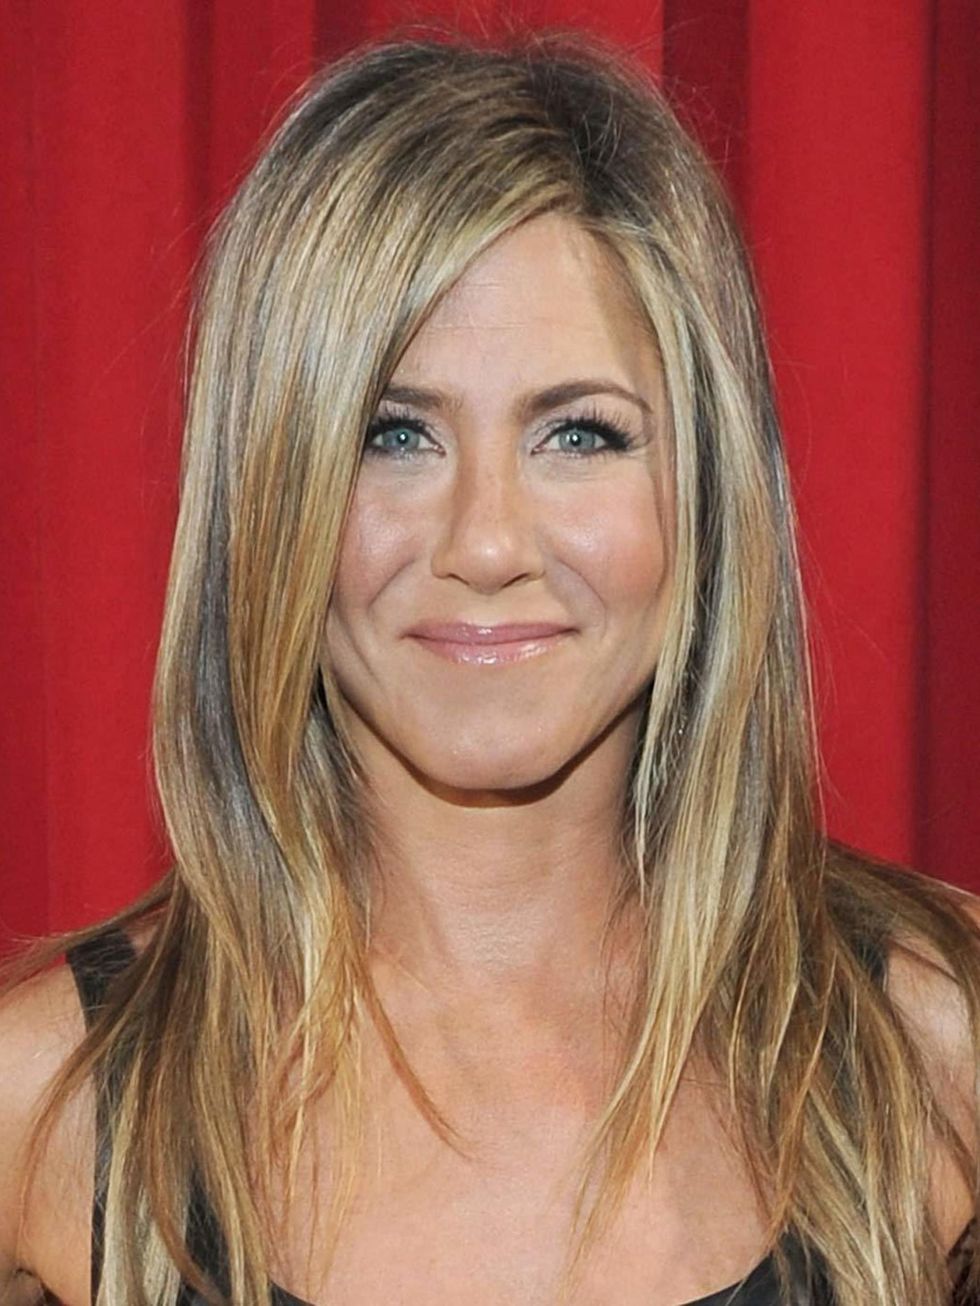 <p>See whose hair Jennifer Aniston has been cutting recently <a href="http://www.elleuk.com/beauty/beauty-notes-daily/jennifer-aniston-cut-jimmey-kimmel-s-hair-on-us-chat-show">here</a>...</p>